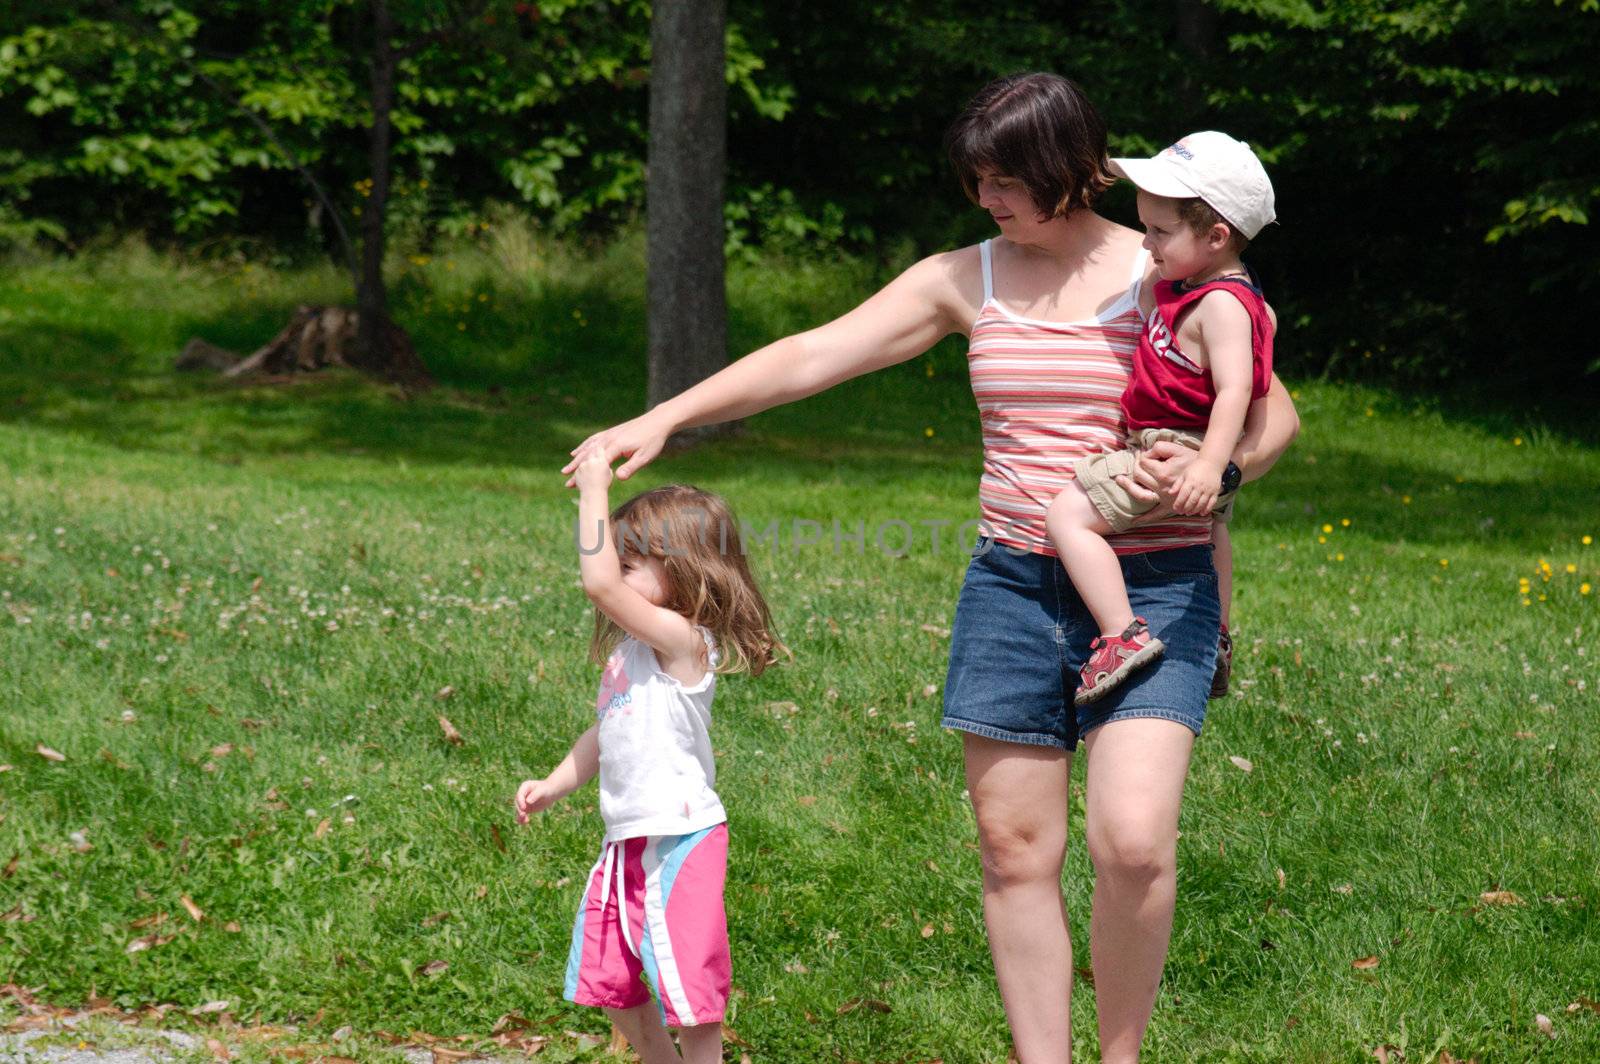 Happy familly (mother with 2 kids) walking in a park with the little daughter dancing